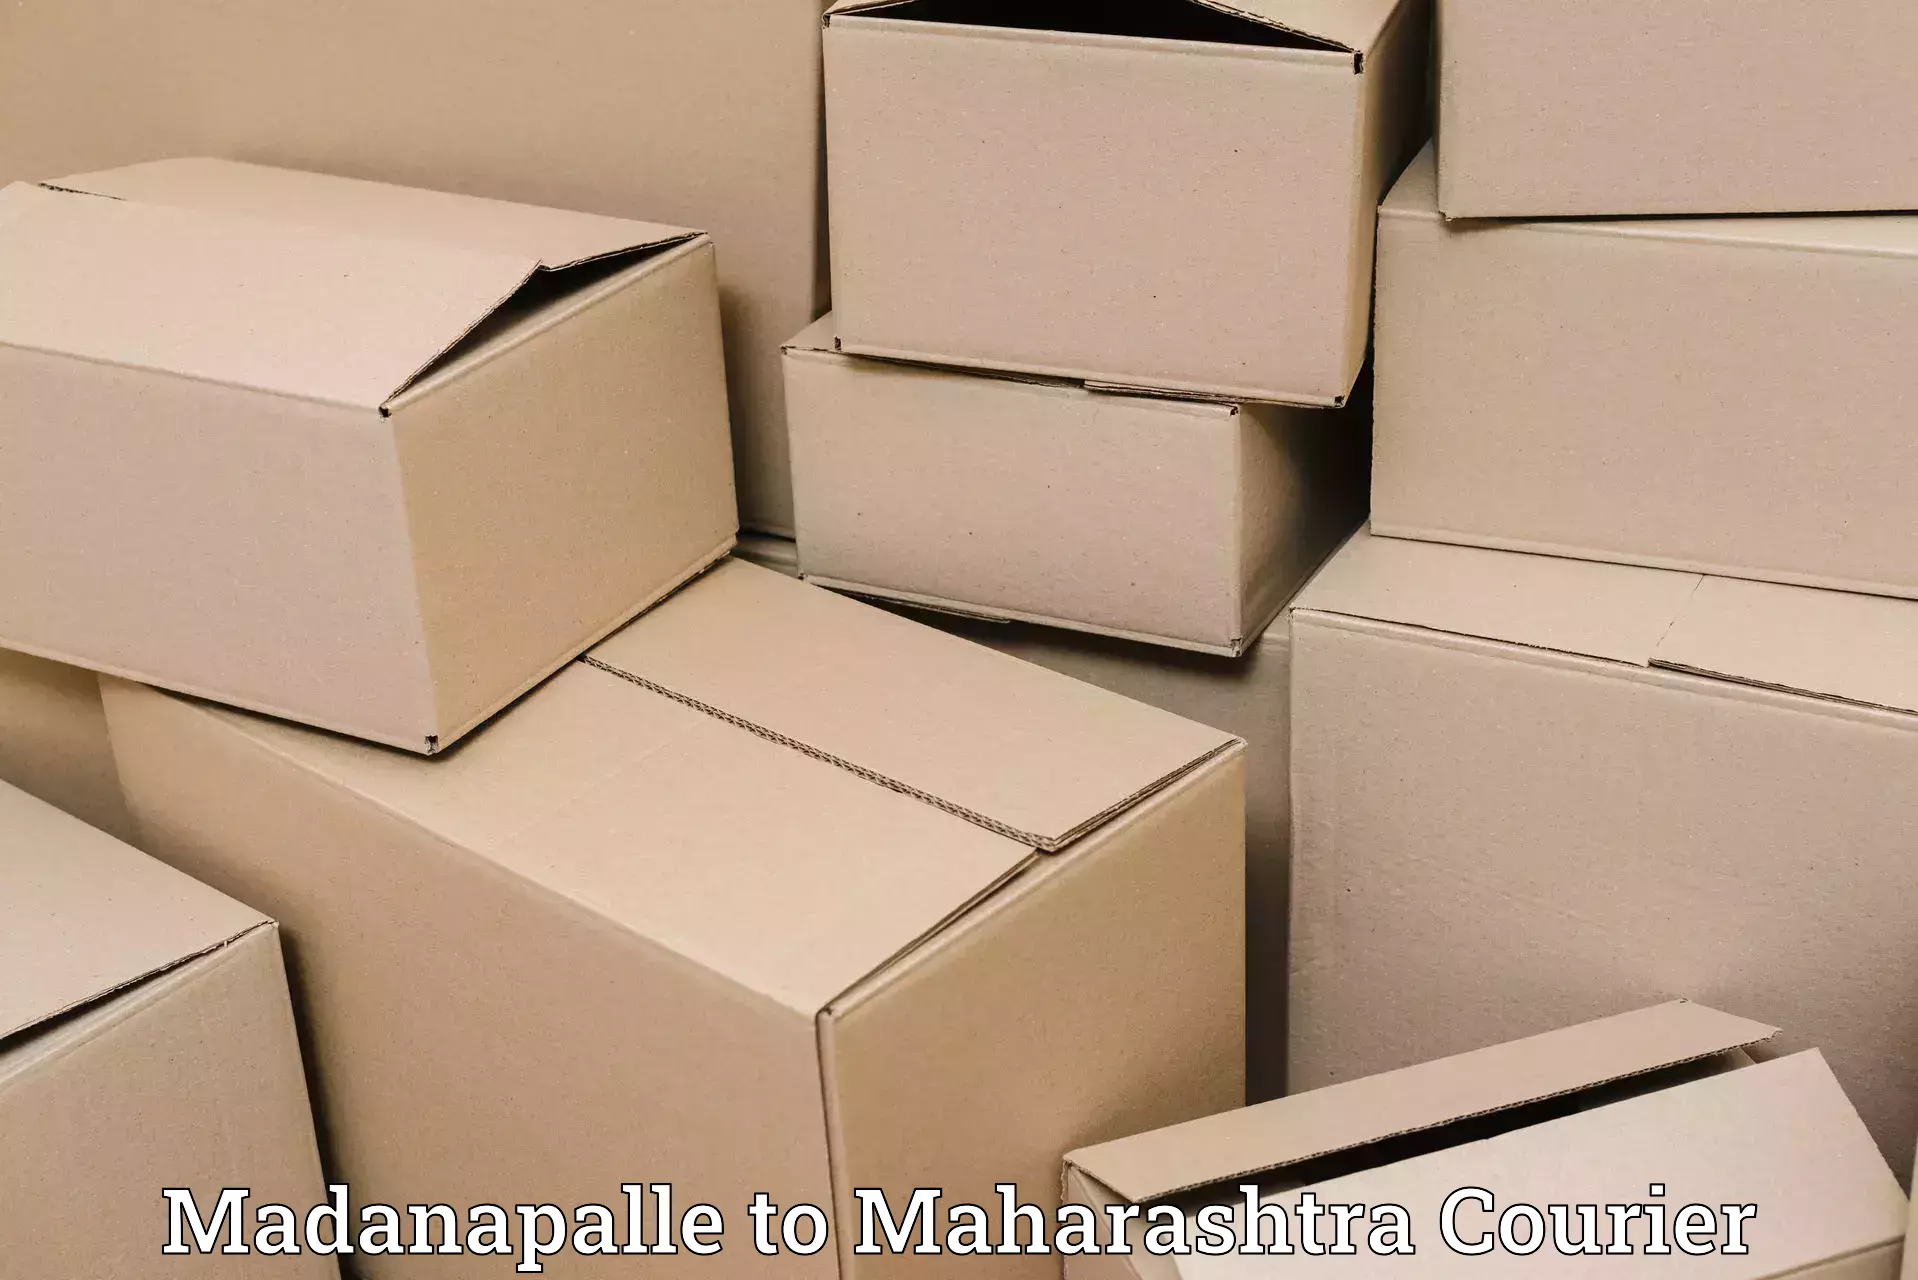 Courier service innovation in Madanapalle to Bhoom